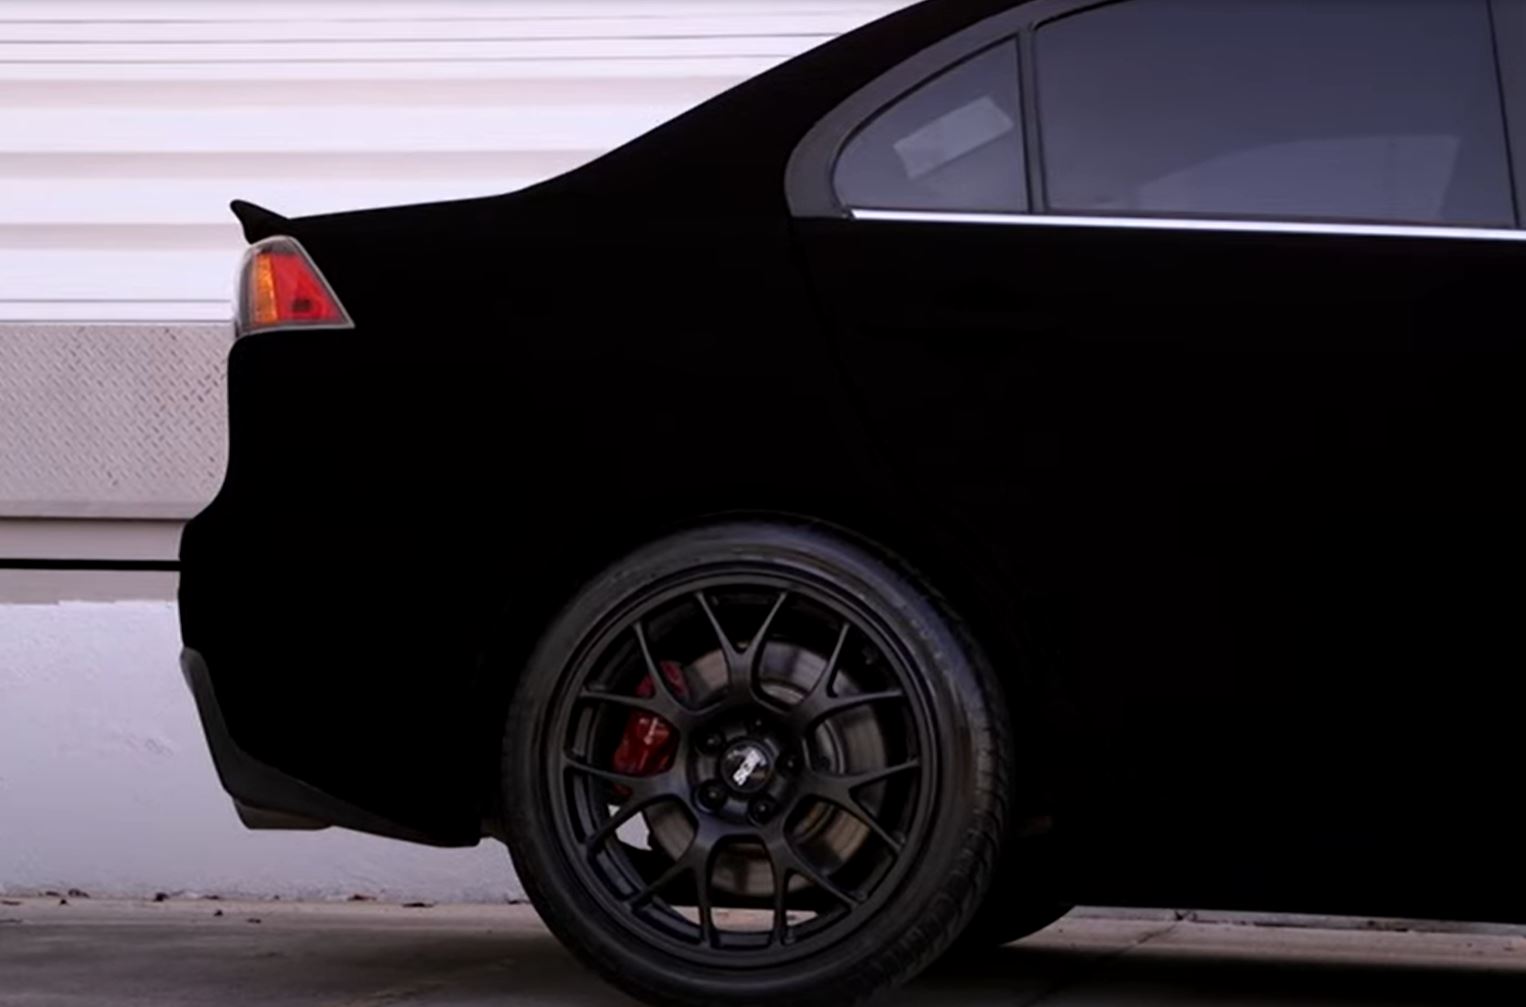 The rear of a Mitsubishi Evo painted in Musou Black